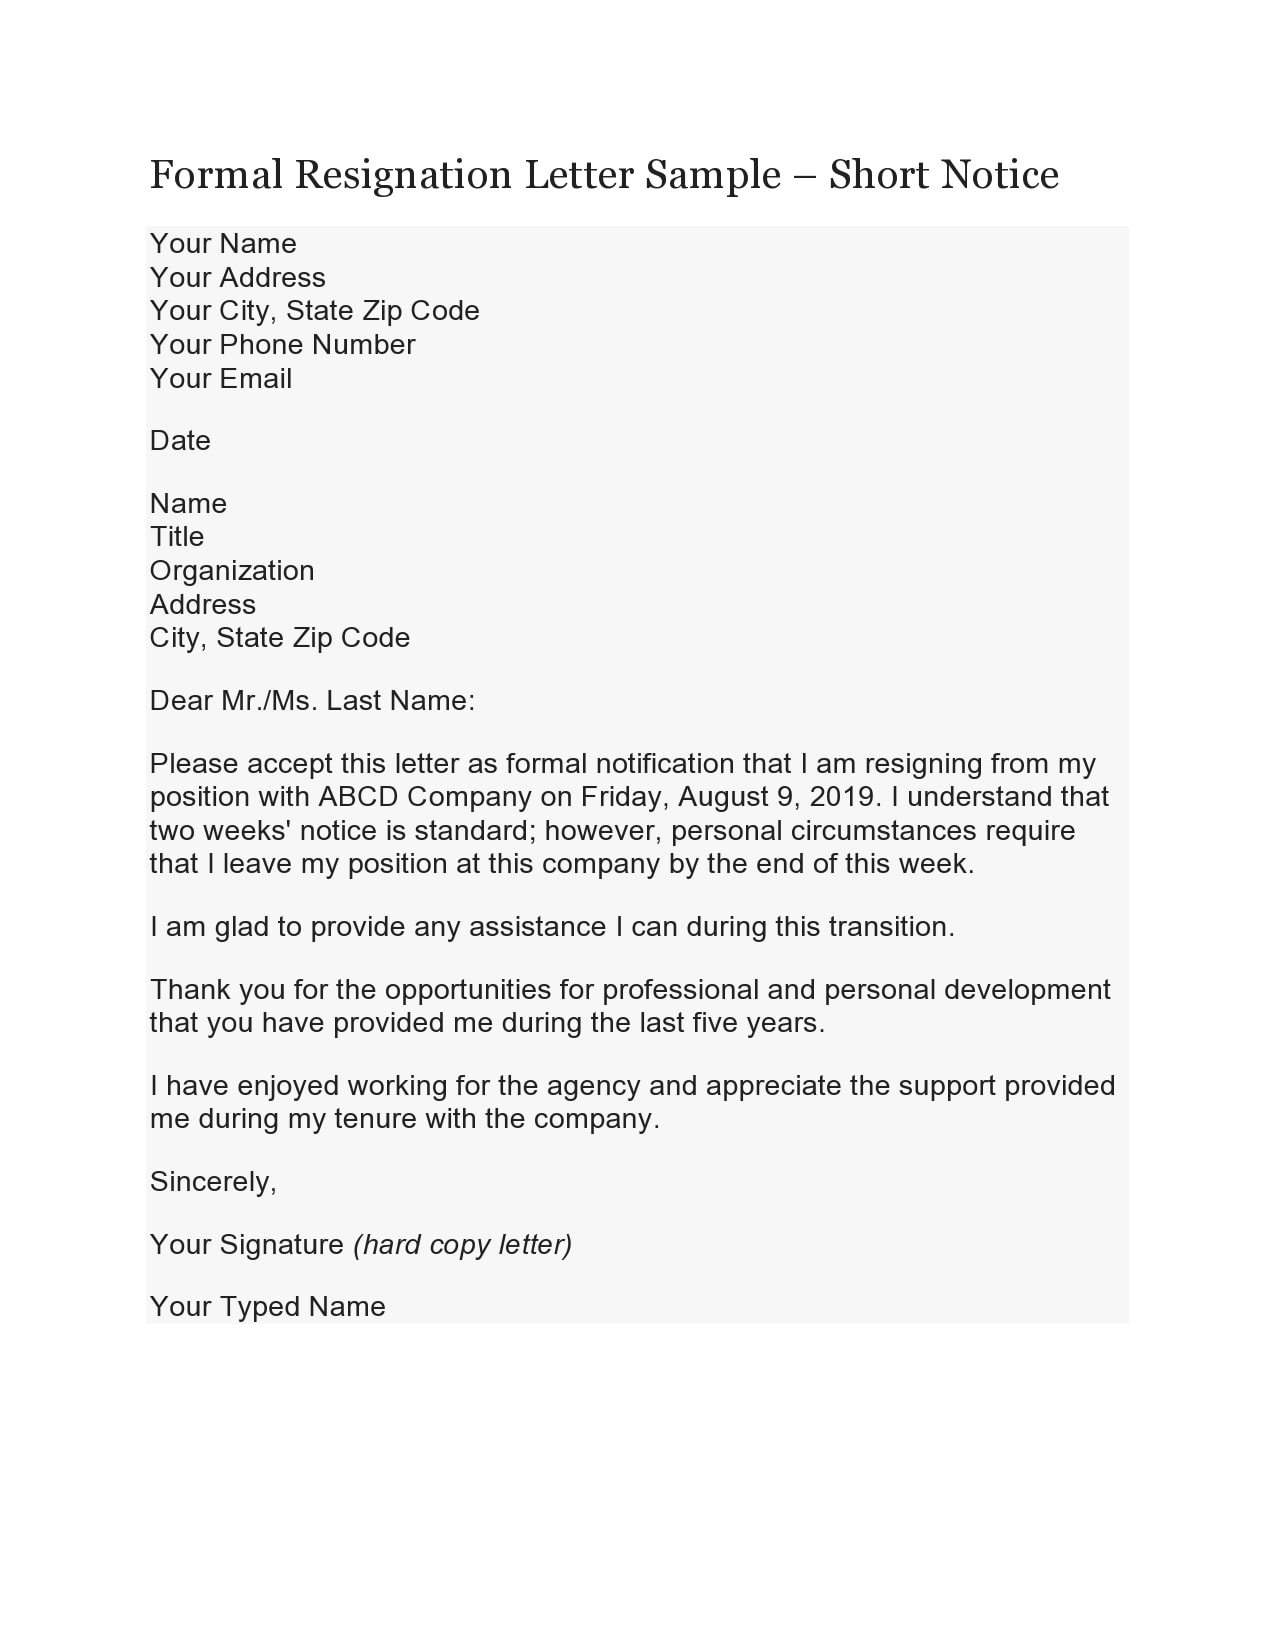 1 week notice resignation letter template example